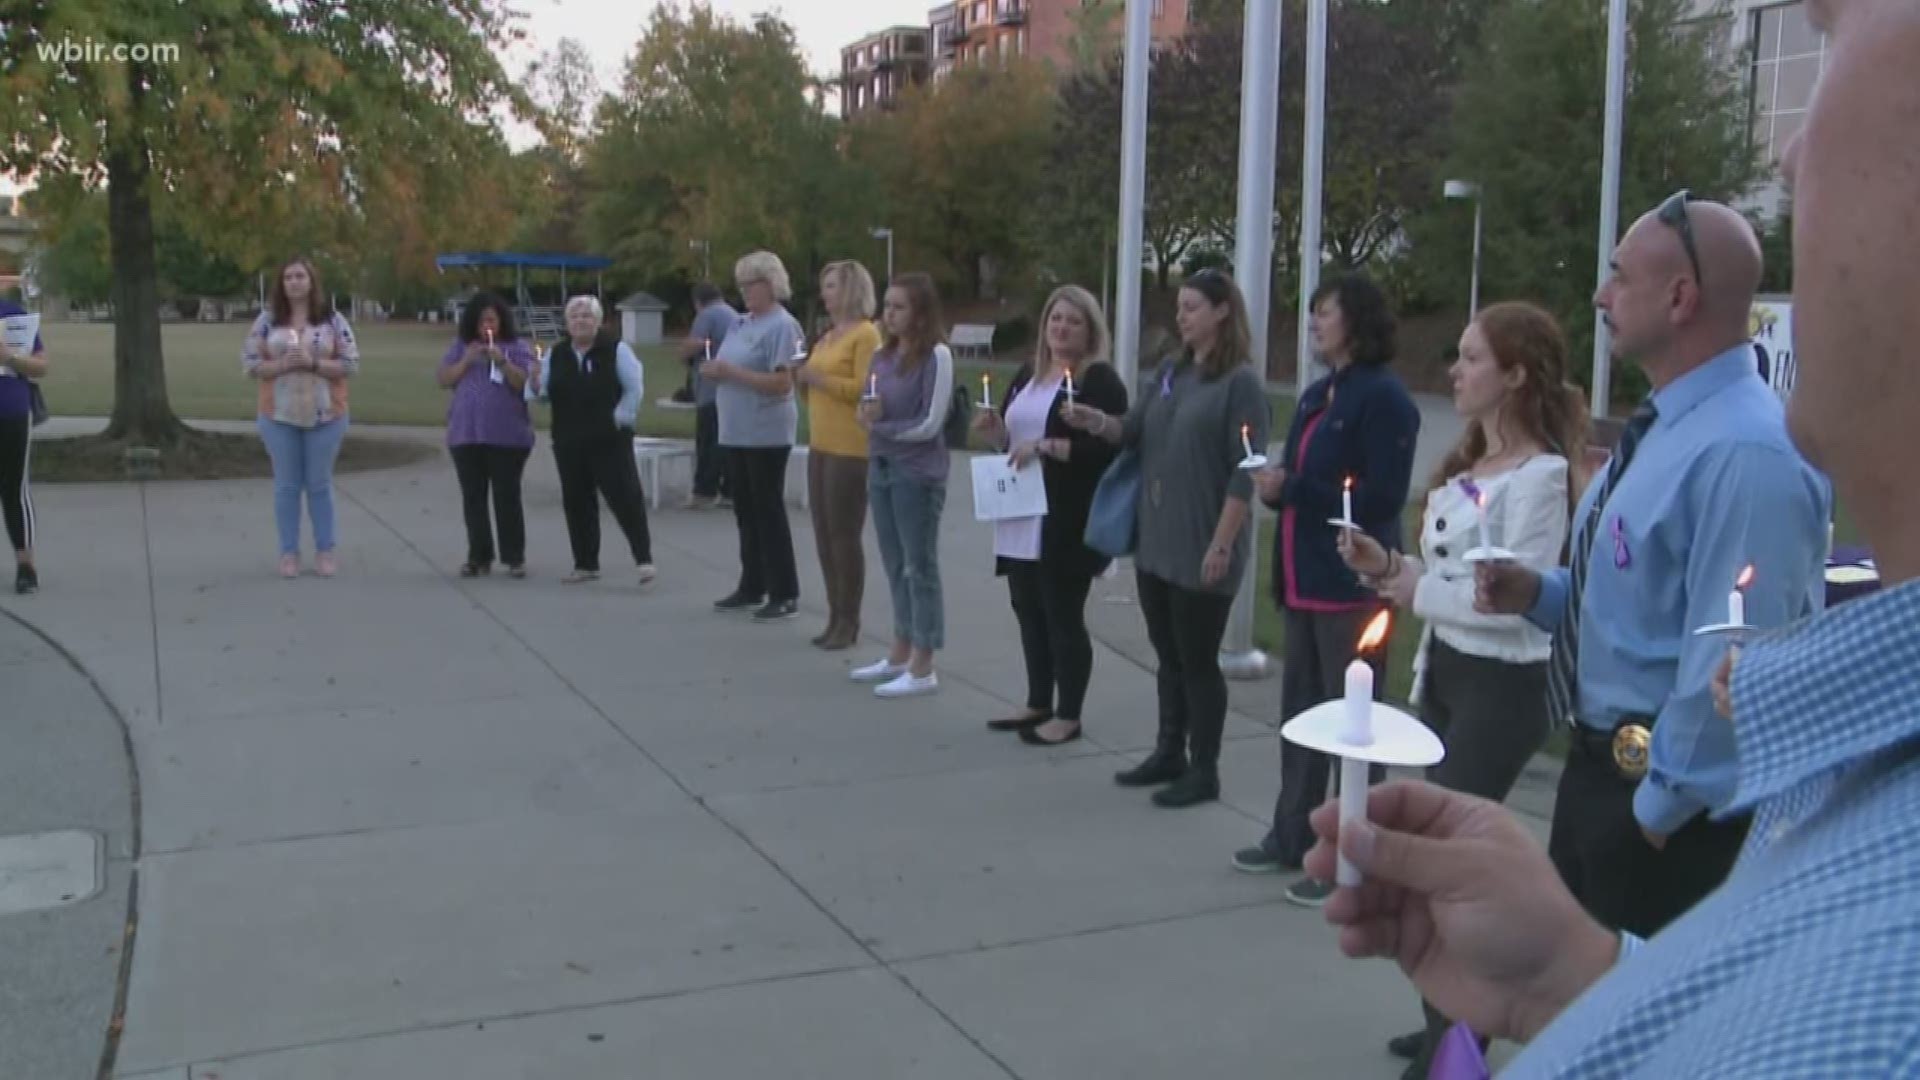 Friendship, support, and hope: Those were key themes tonight at  a vigil for victims of domestic violence at the Knoxville Convention Center.